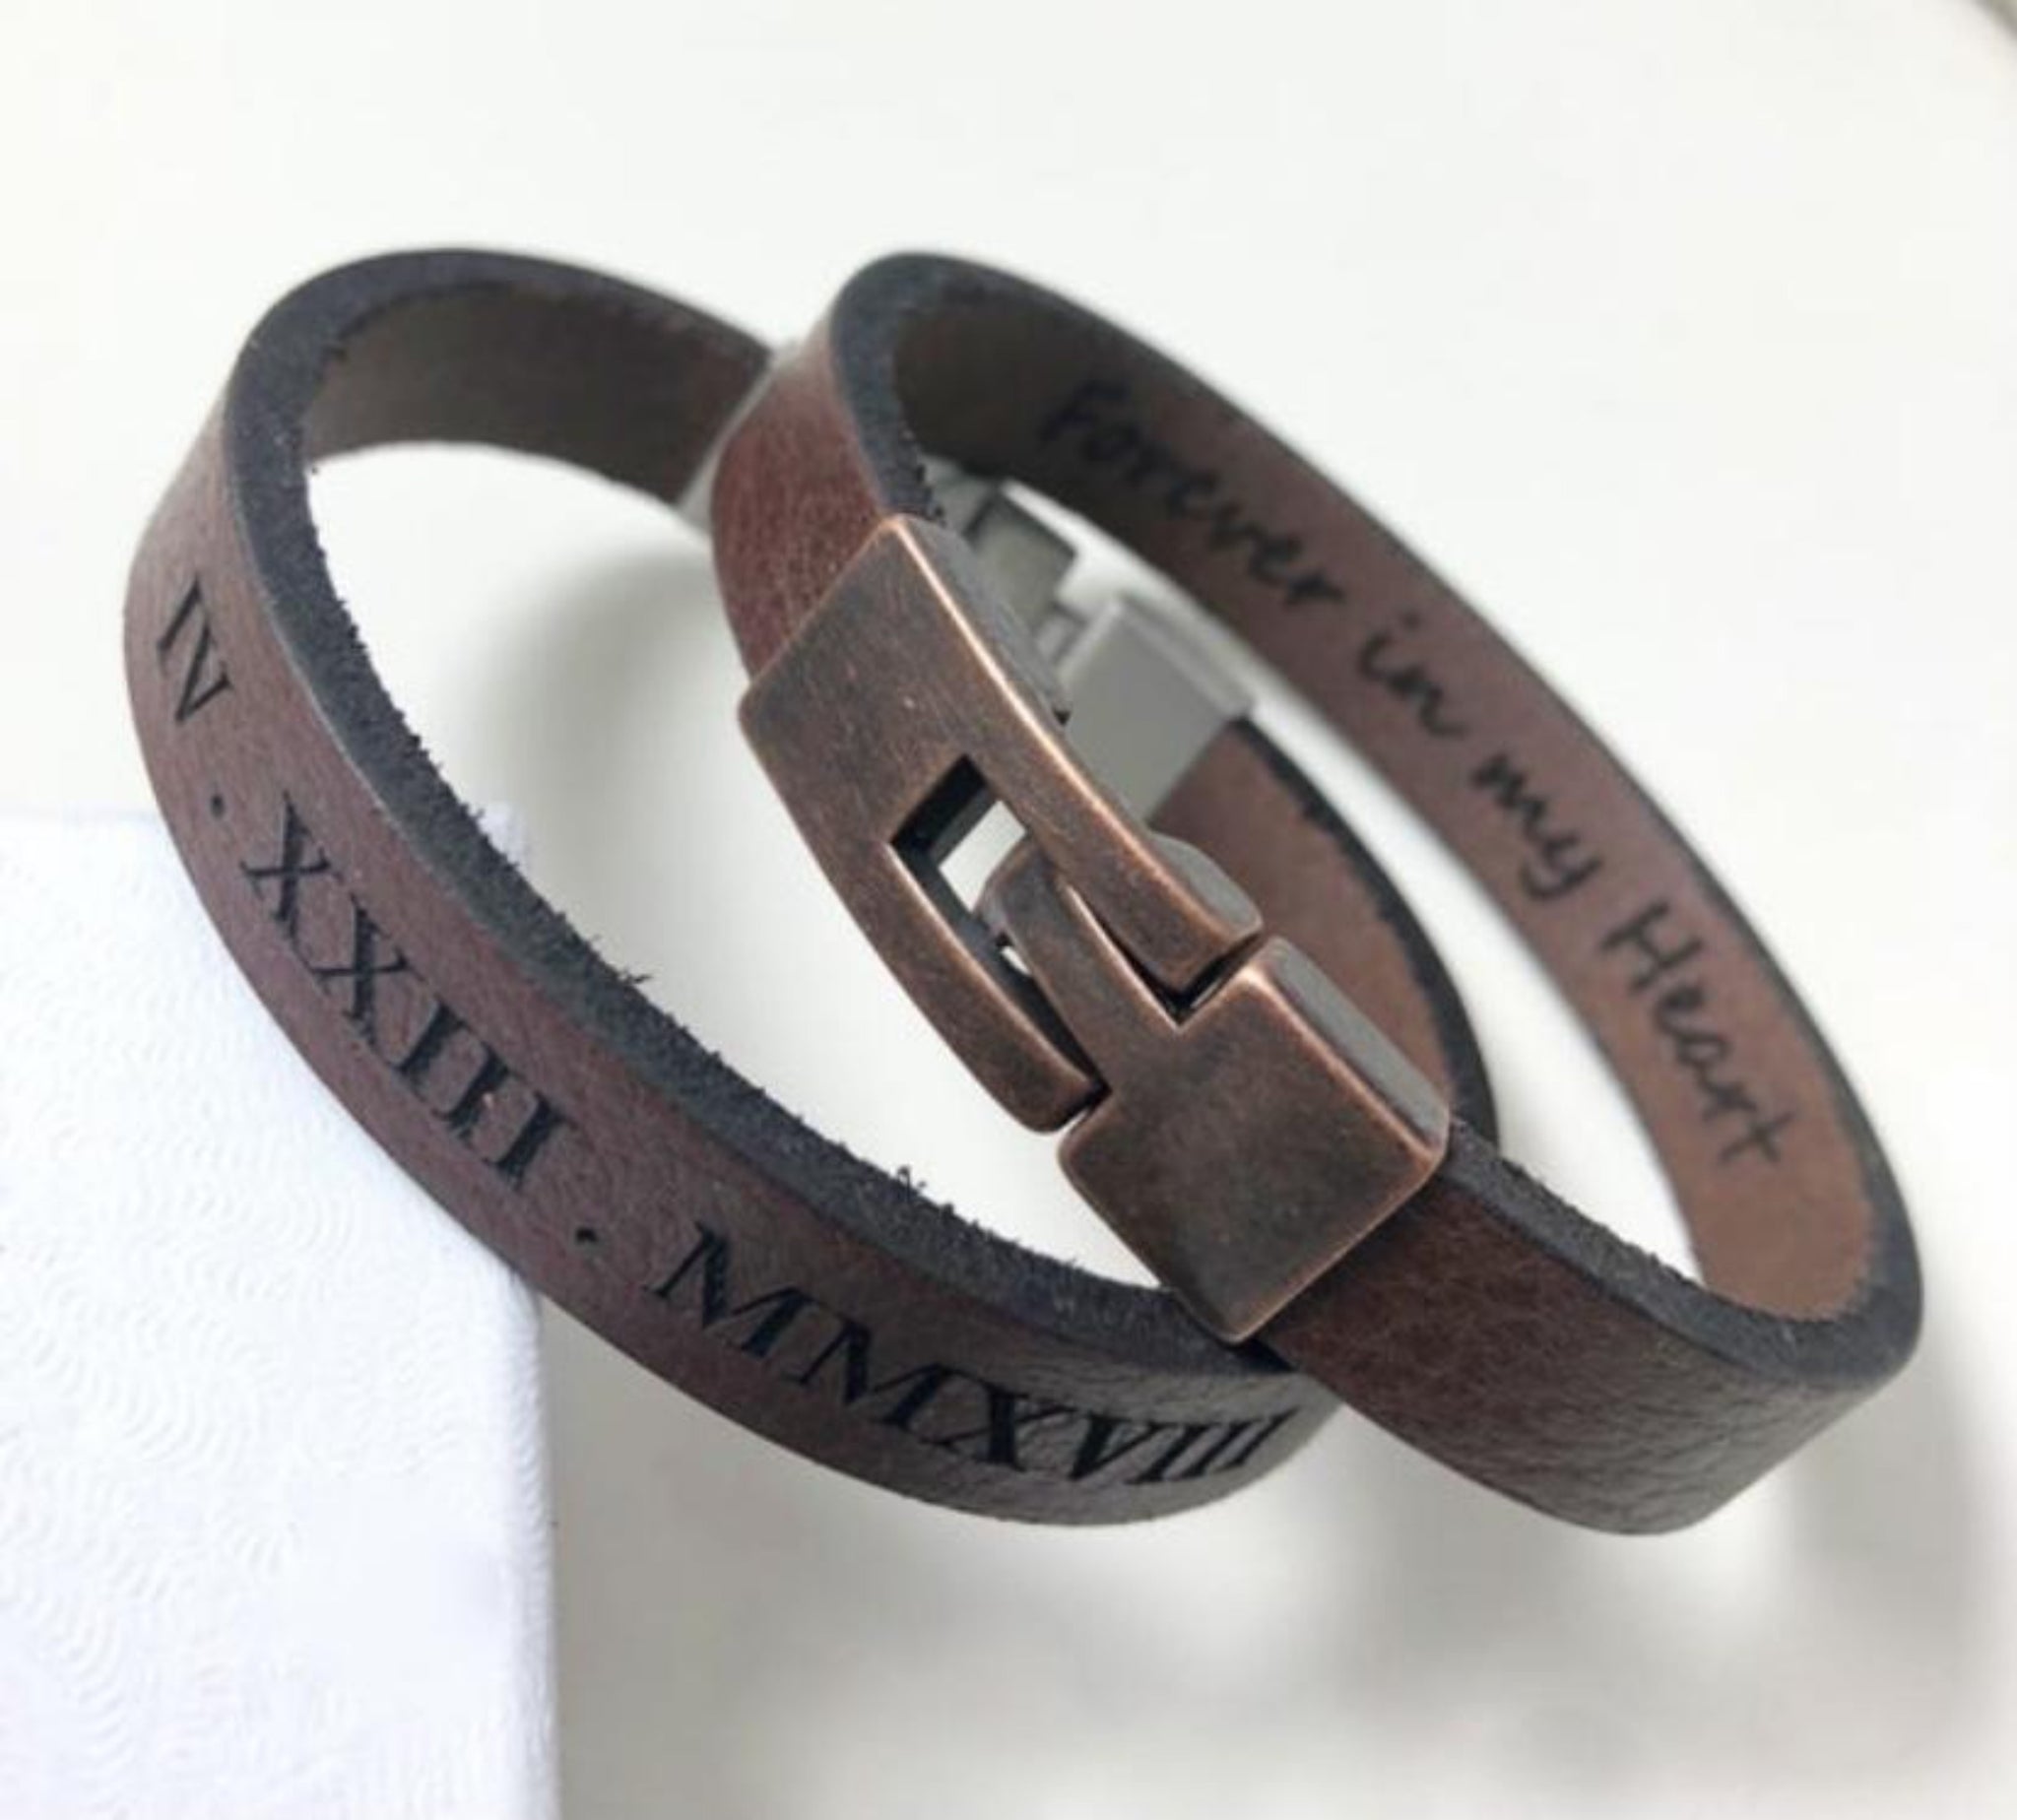 Capital Letter Leather Bracelet Personalized Custom Name Bracelet For Man  Father's Day Gift | Bracelets for men, Leather bracelet, Fathers day gifts